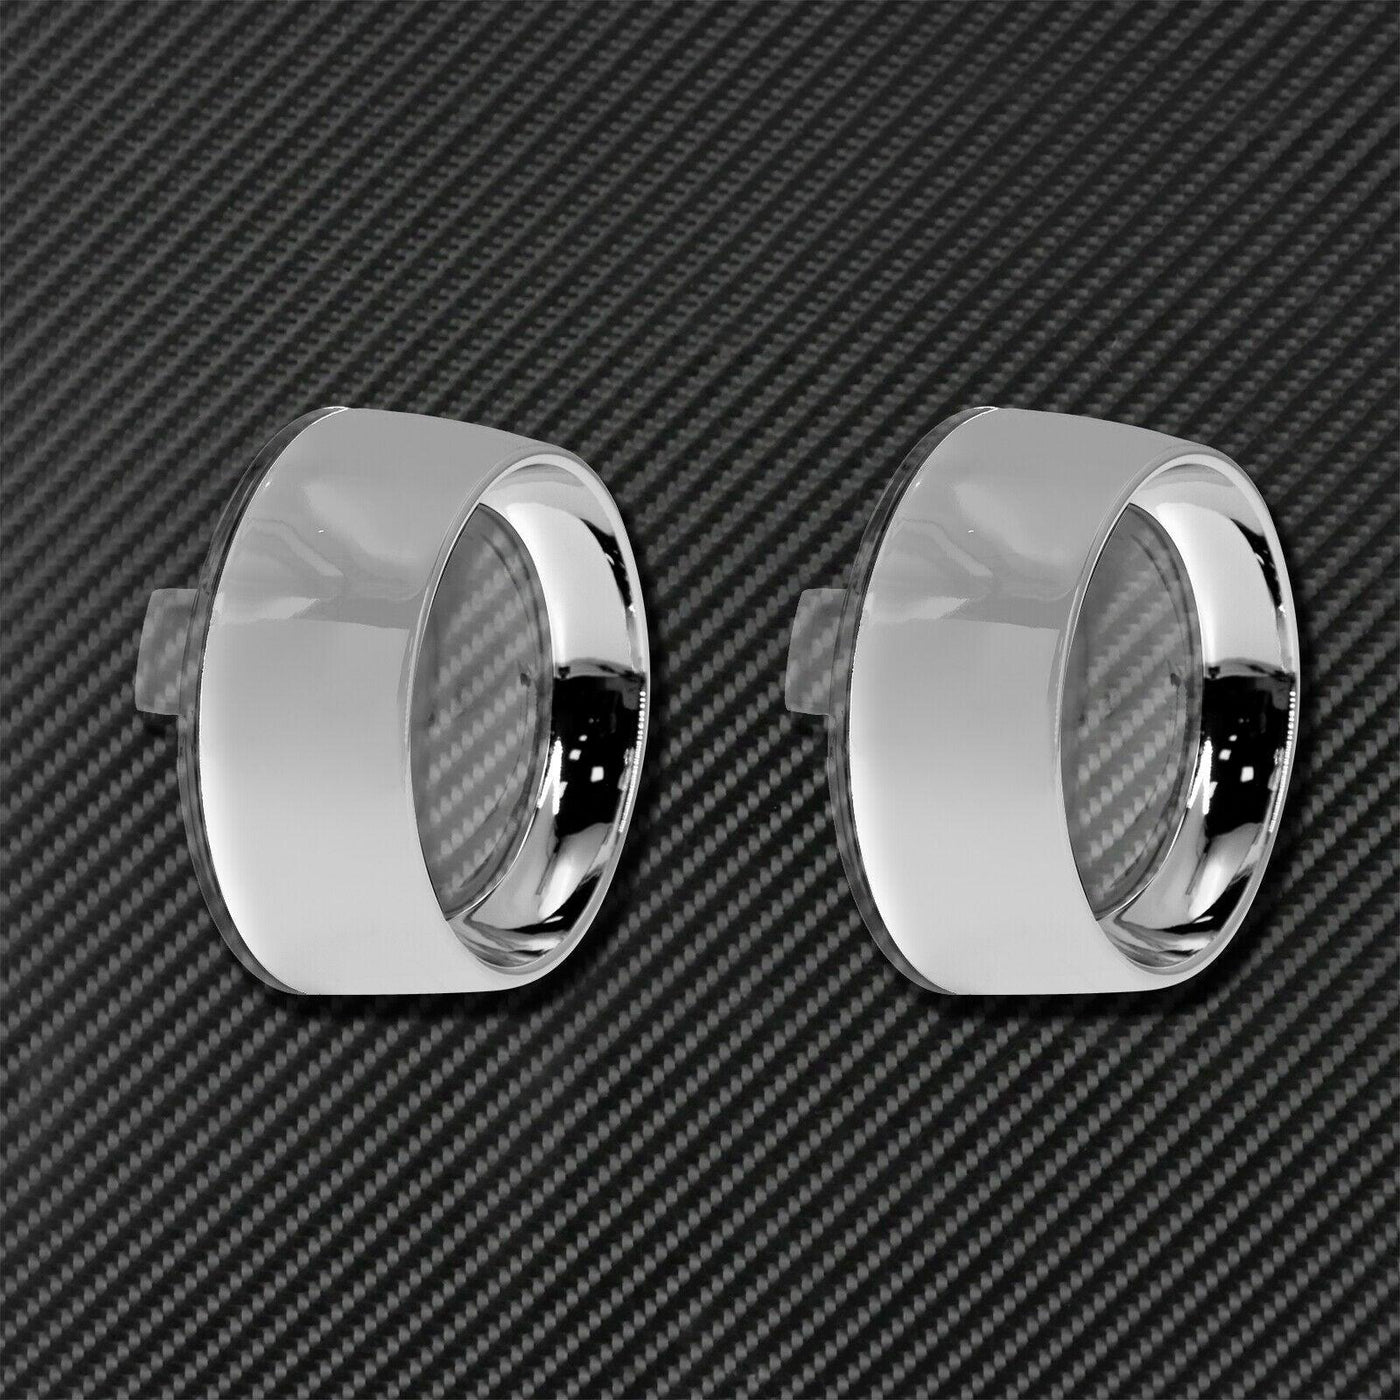 Chrome Clear Trim Ring Bullet Turn Signal Lens Cover Fit For Harley Softail Dyna - Moto Life Products